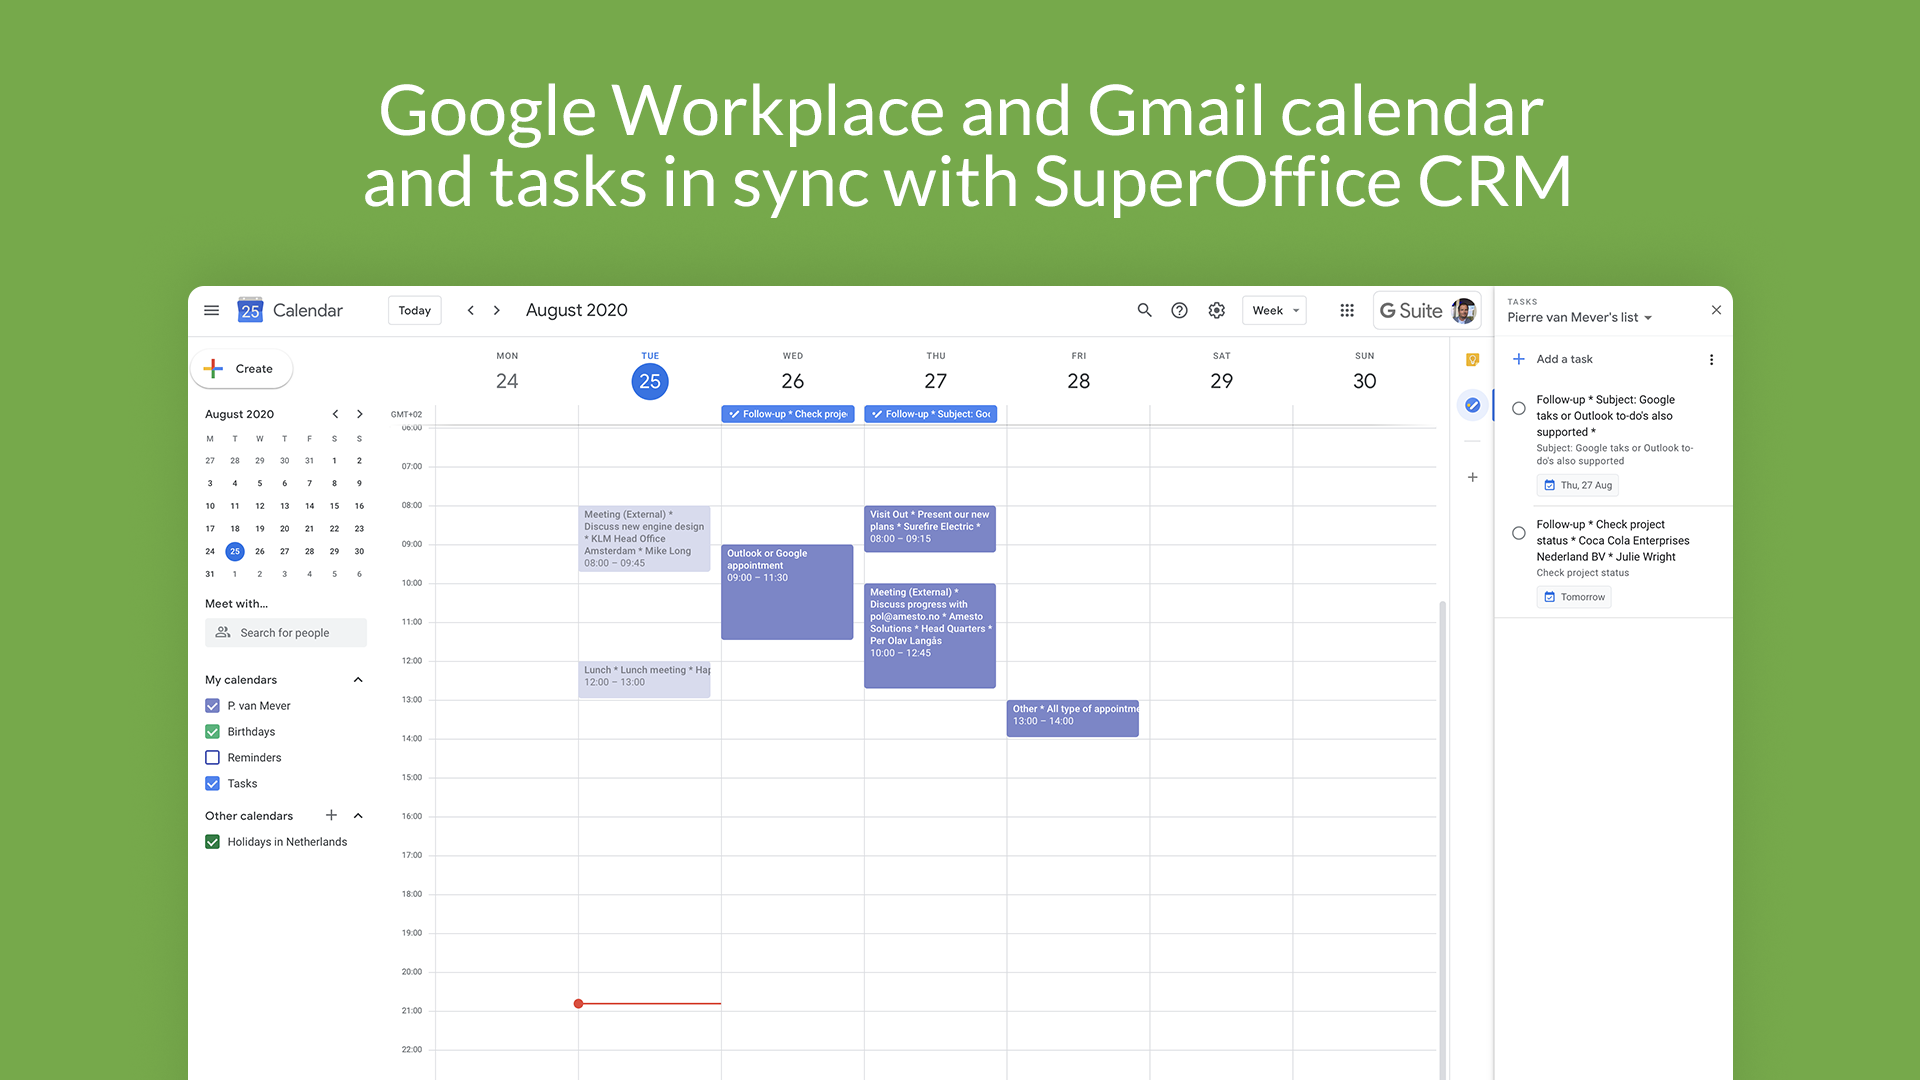 Google Workplace and Gmail calendar and tasks in sync with SuperOffice CRM